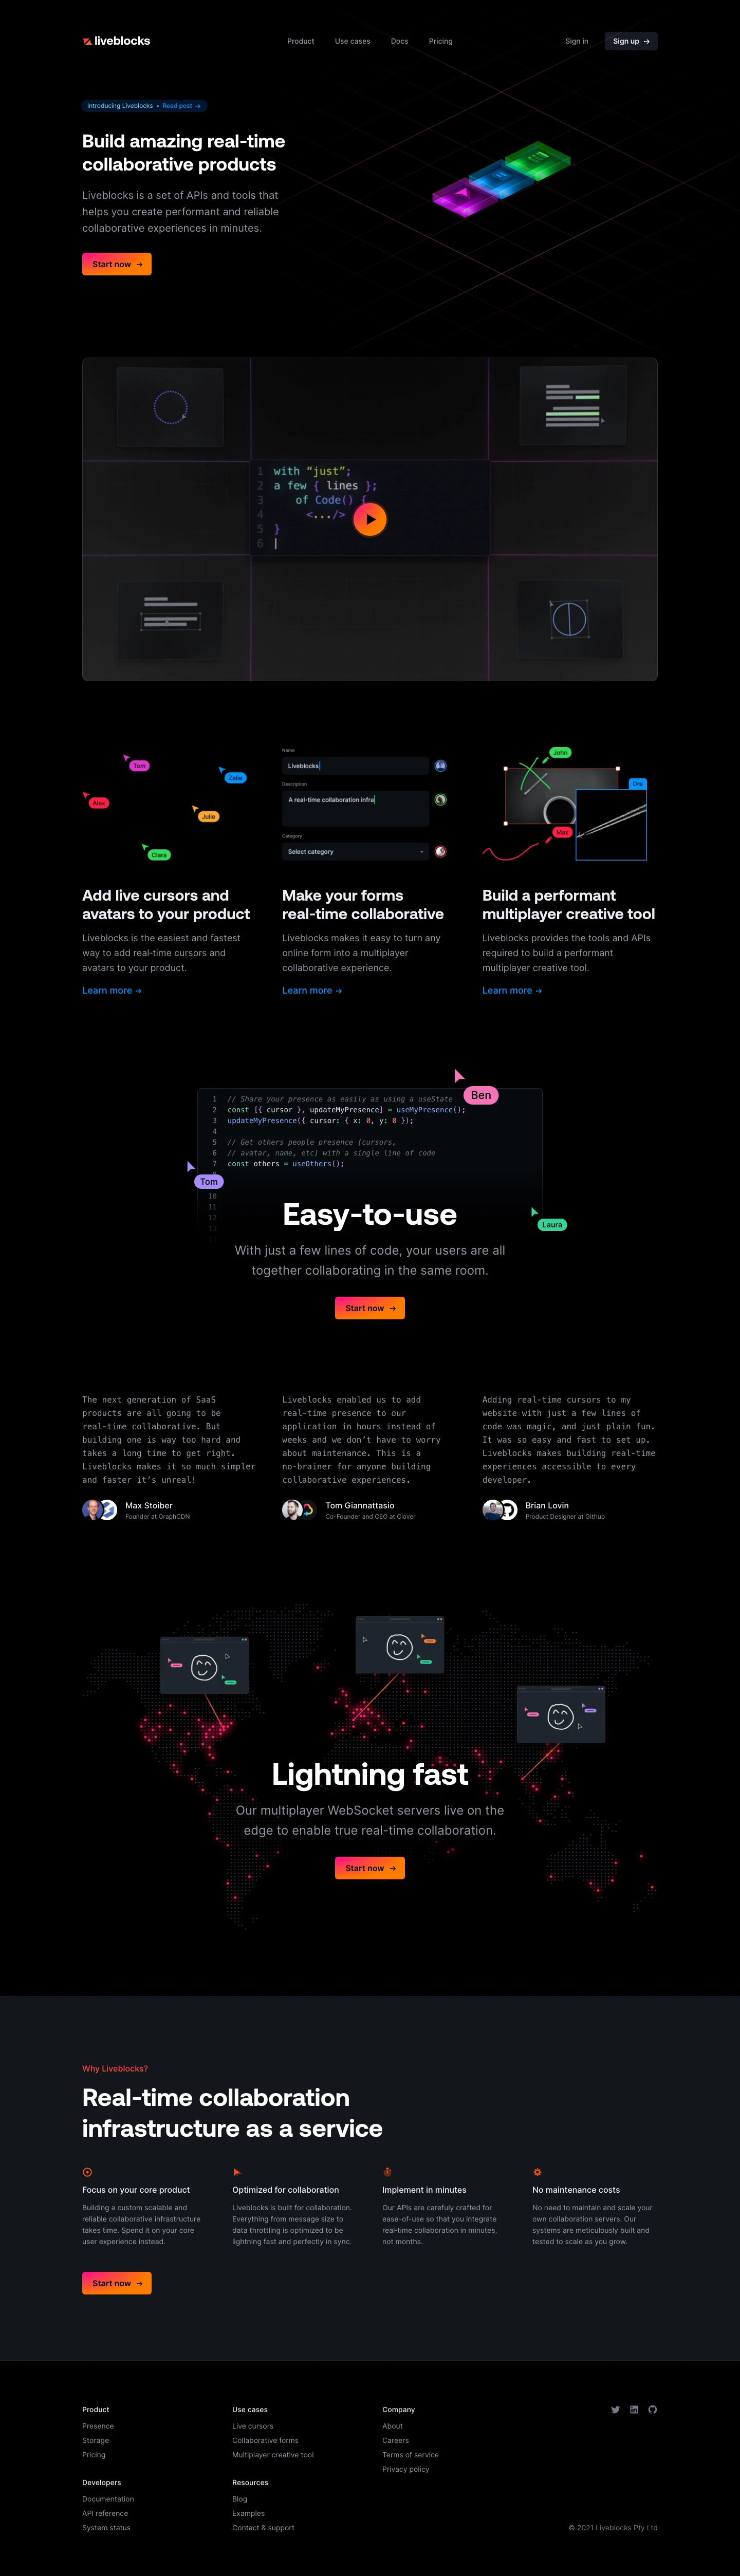 Liveblocks Landing Page Example: Build amazing real‑time collaborative products. Liveblocks is a set of APIs and tools that helps you create performant and reliable collaborative experiences in minutes.